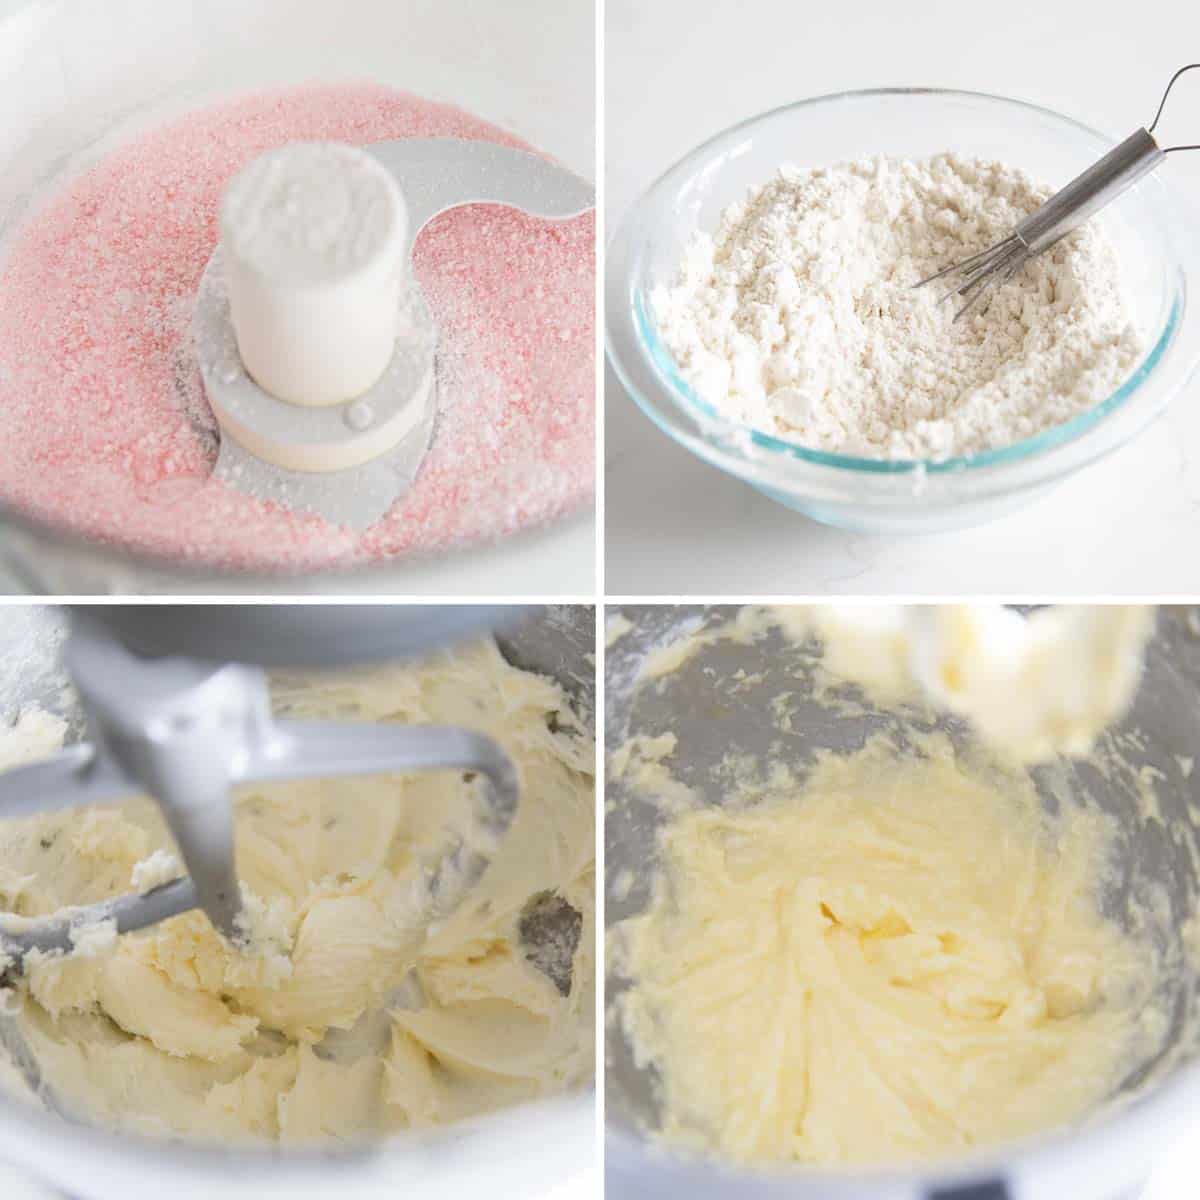 Steps for making peppermint kiss cookies.